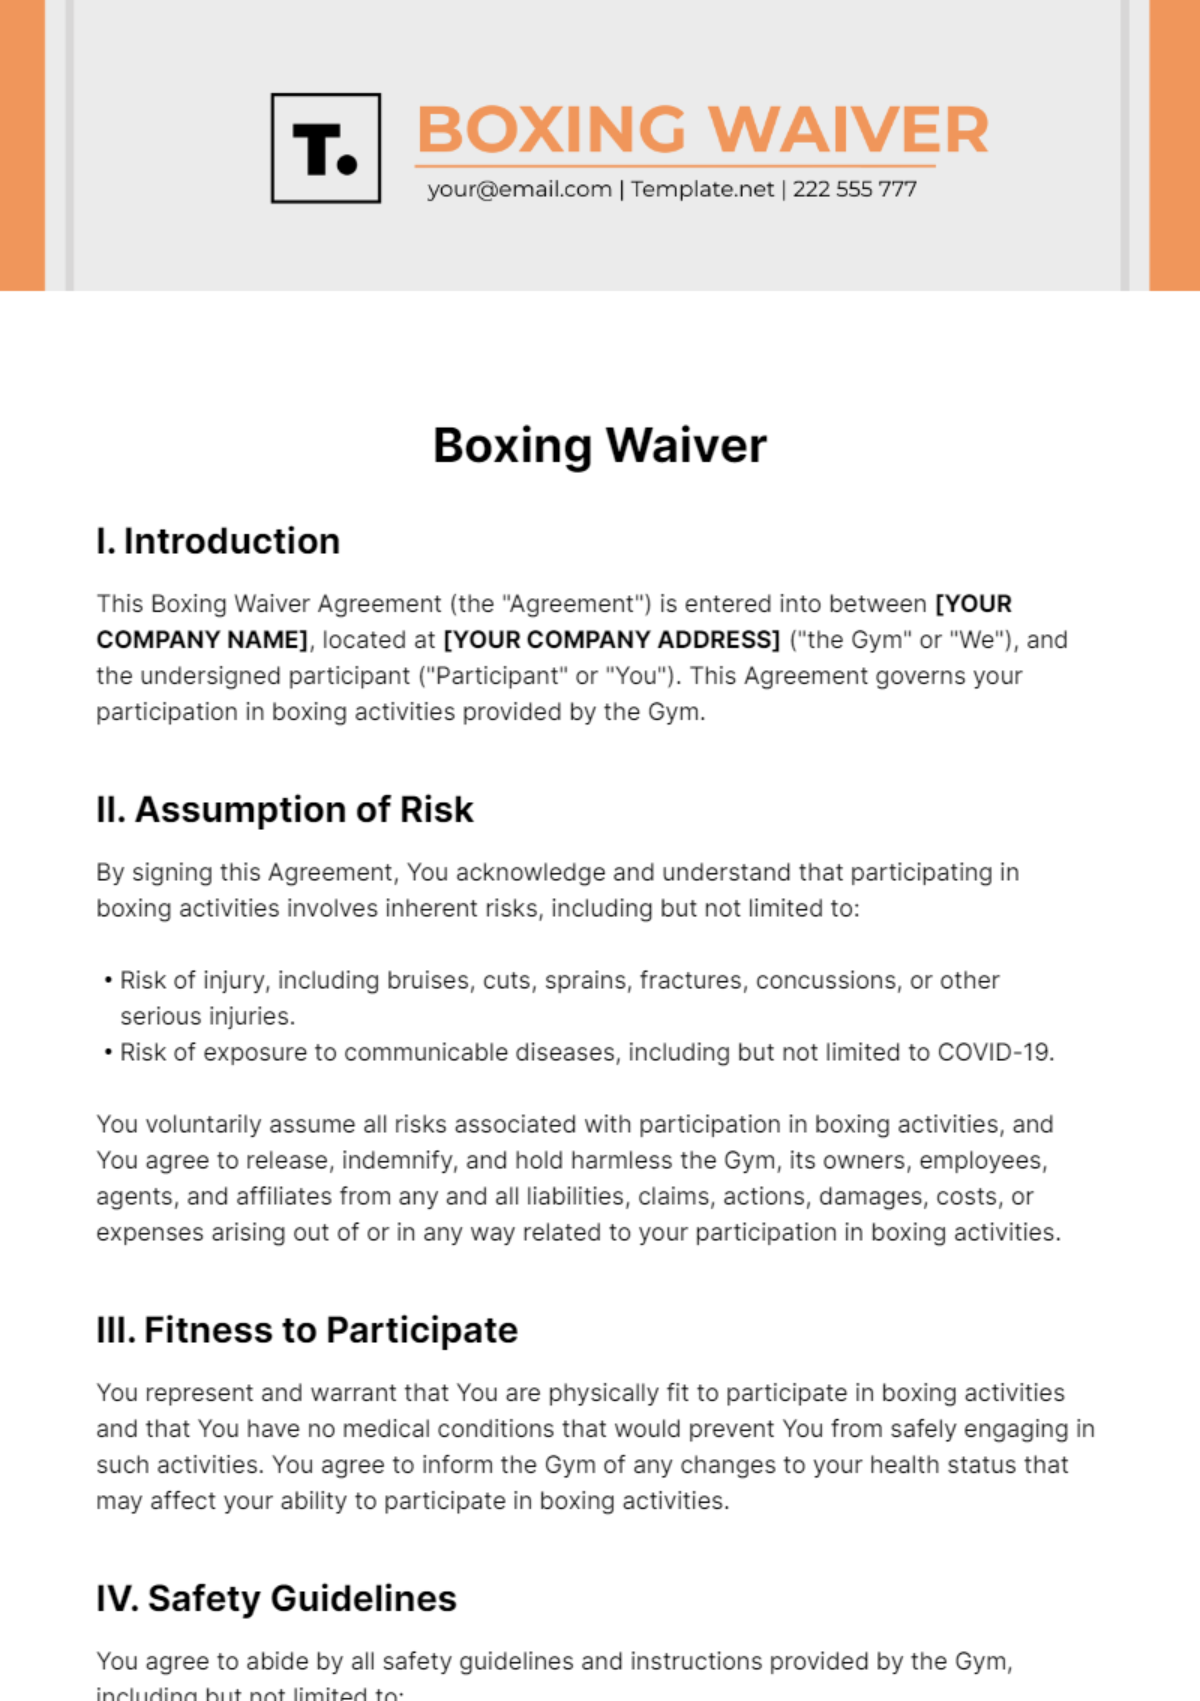 Free Boxing Waiver Template